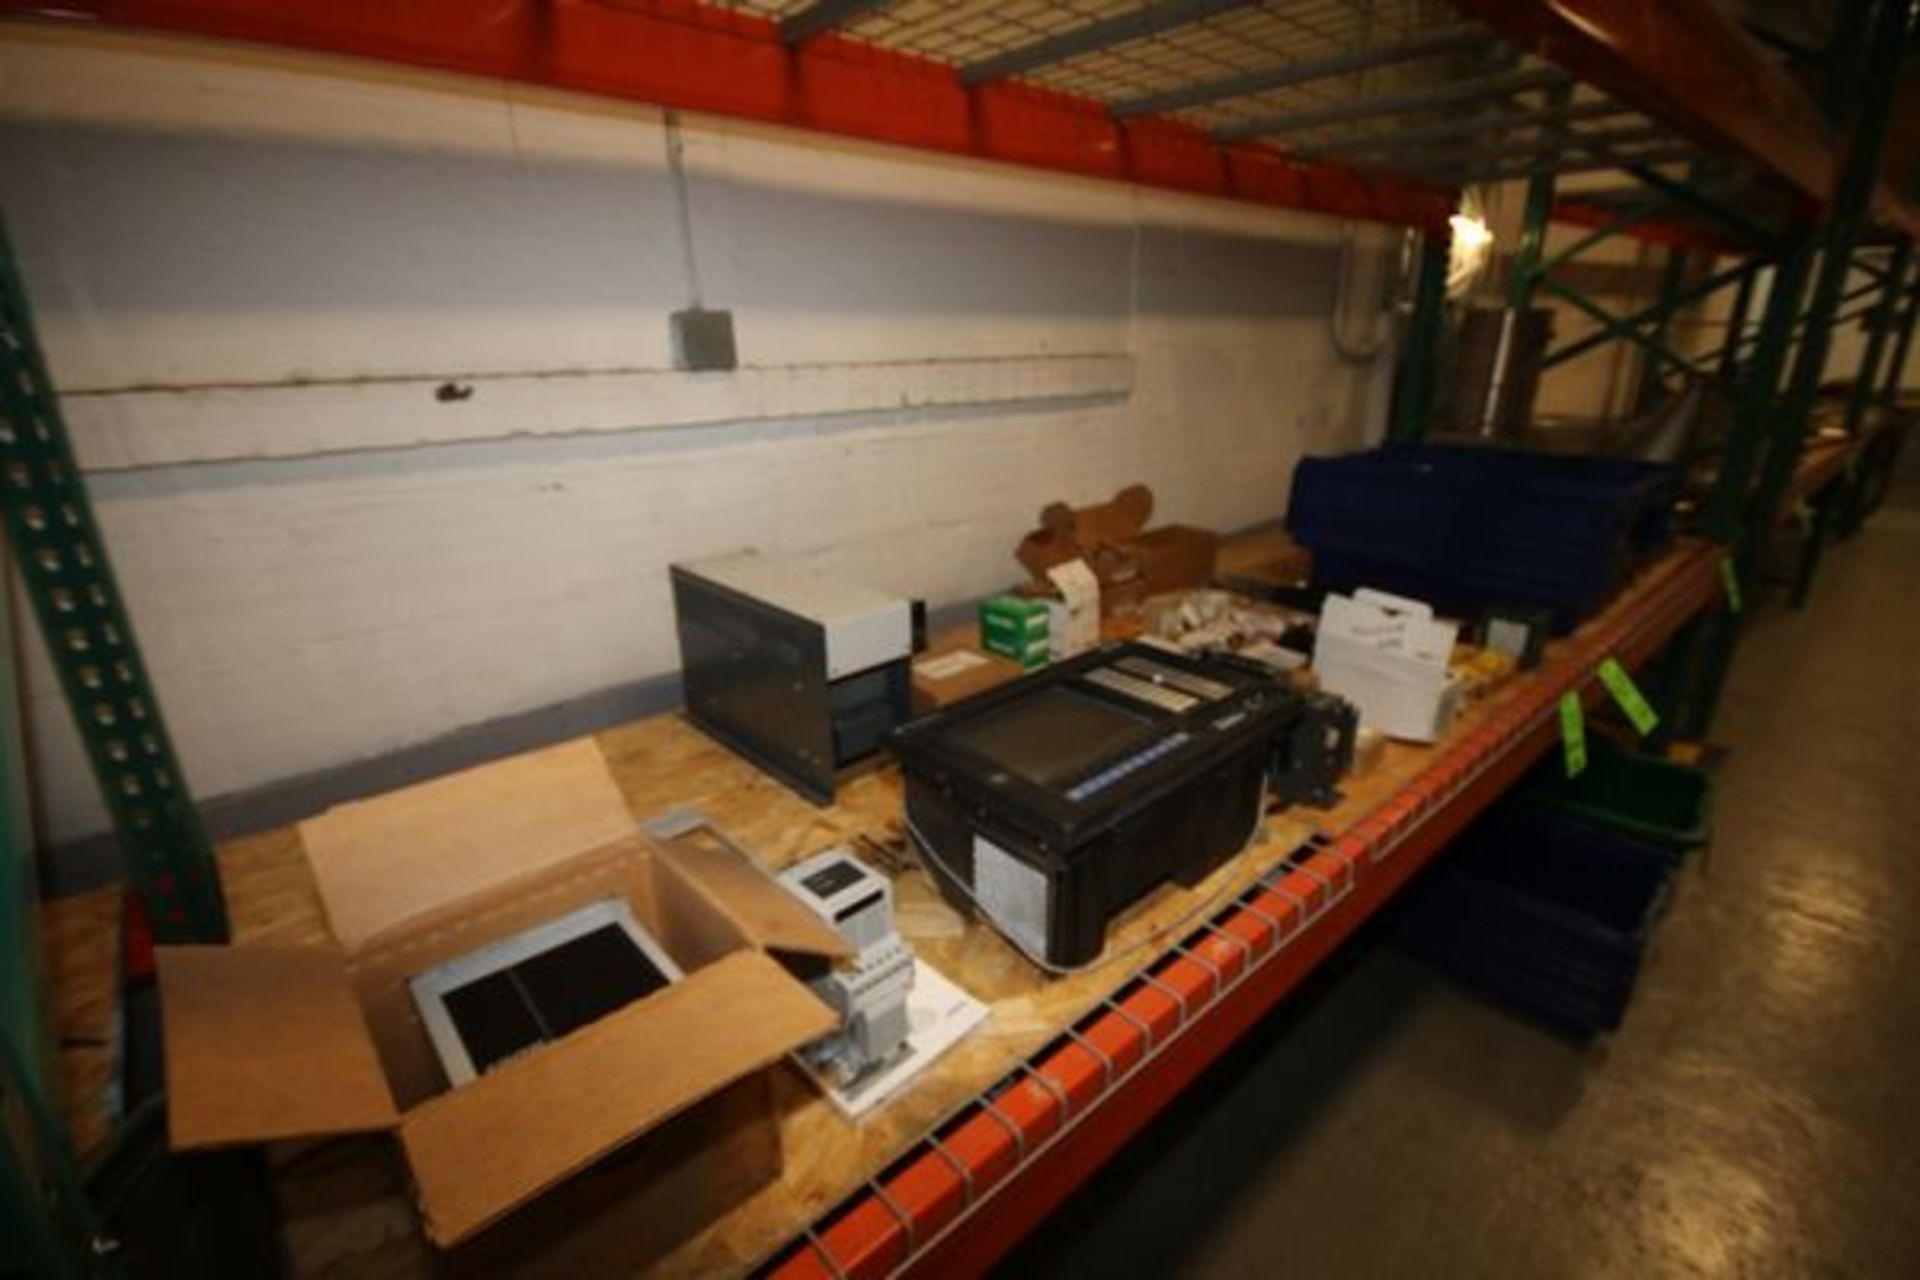 Lot of Assorted Electrical, Including Allen-Bradley VFDs, Allen-Bradley Touchscreen, Fuses, Safety - Image 2 of 4